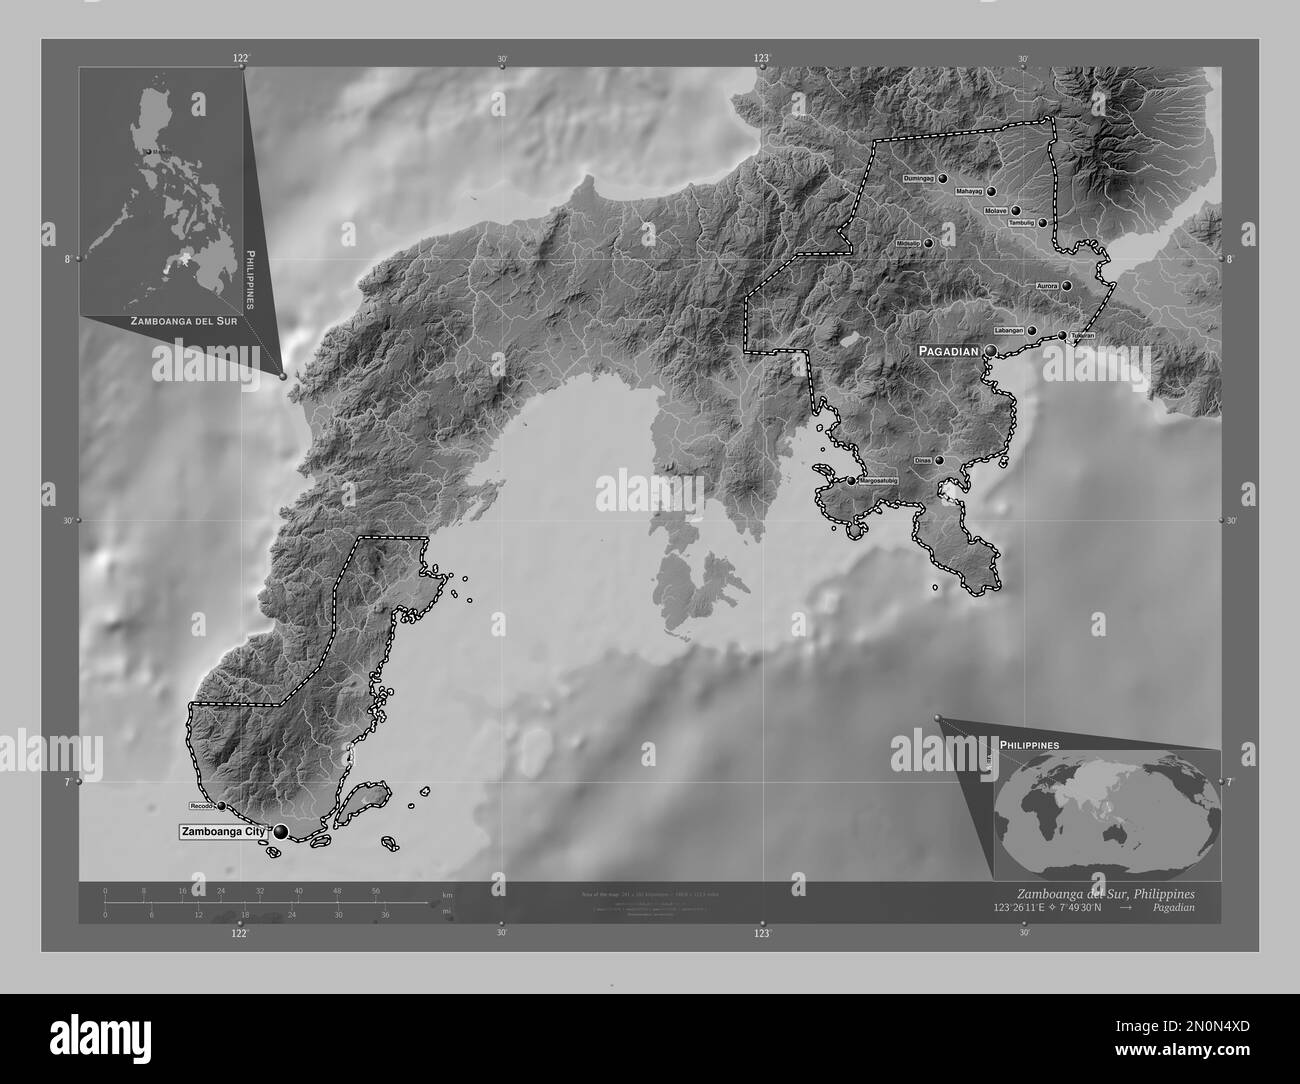 Zamboanga del Sur, province of Philippines. Grayscale elevation map with lakes and rivers. Locations and names of major cities of the region. Corner a Stock Photo